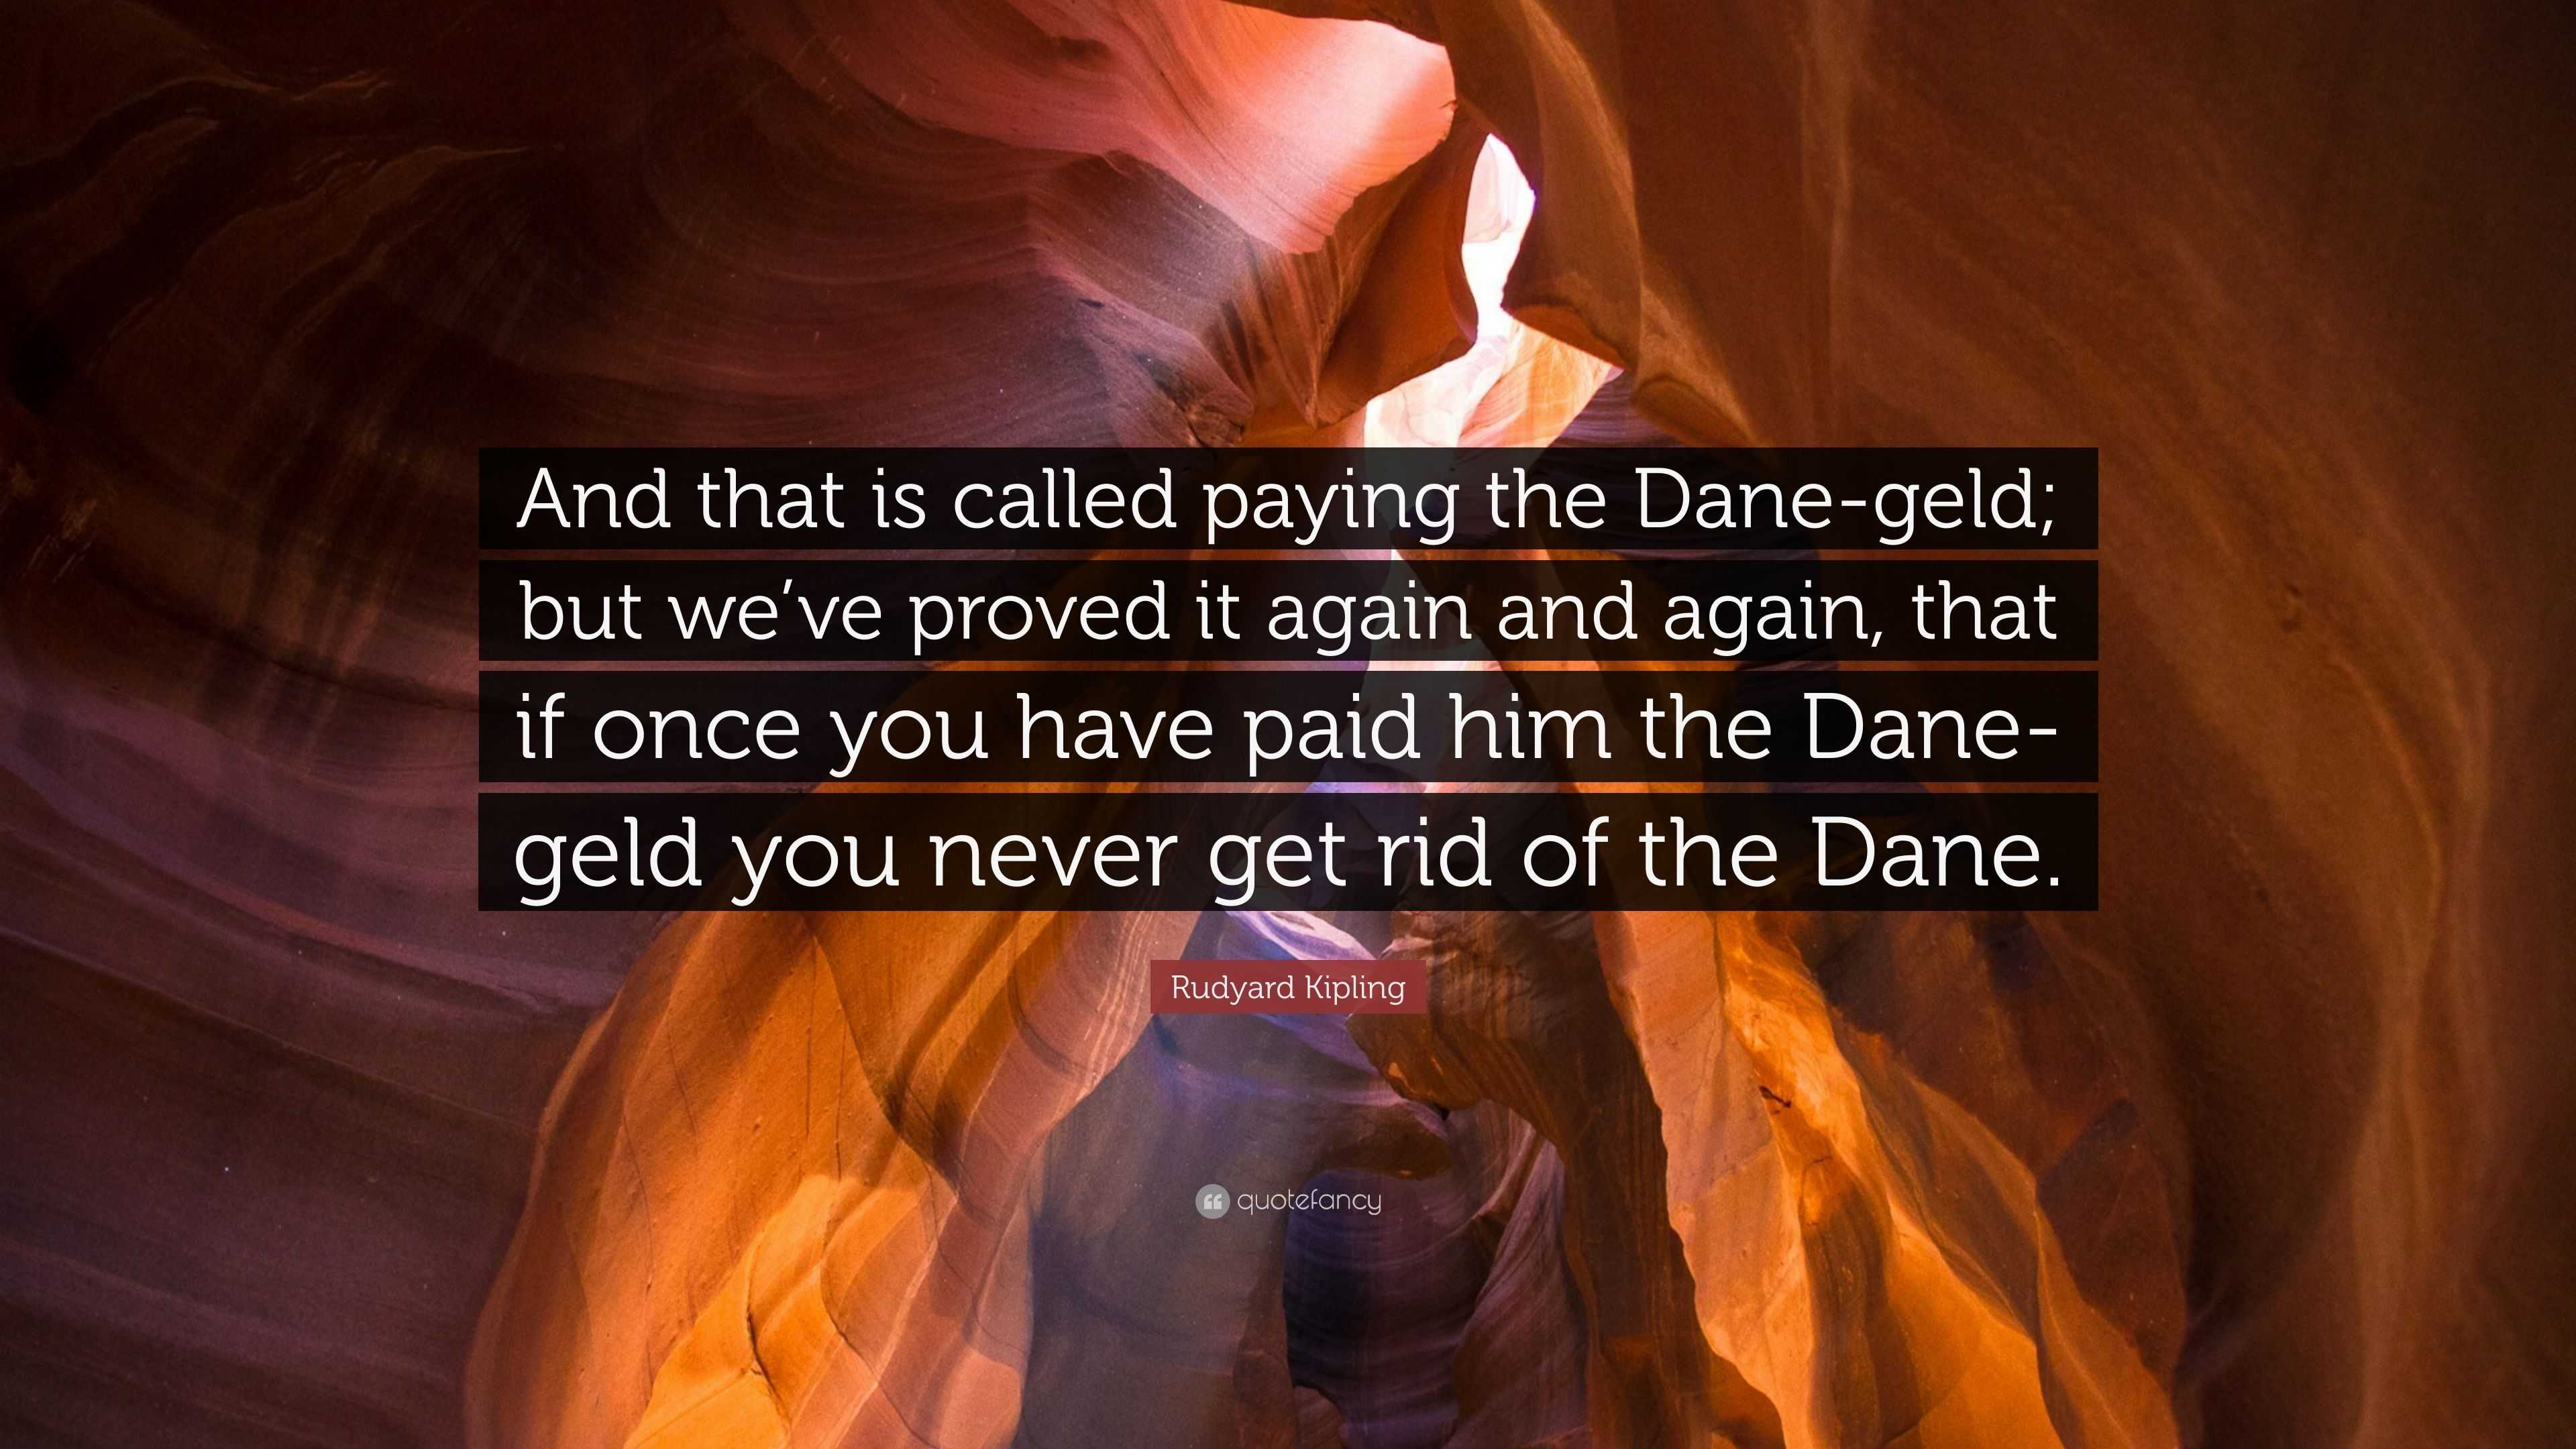 Rudyard Kipling Quote: “And that is called paying the Dane-geld; but we've  proved it again and again, that if once you have paid him the Dane-ge...”